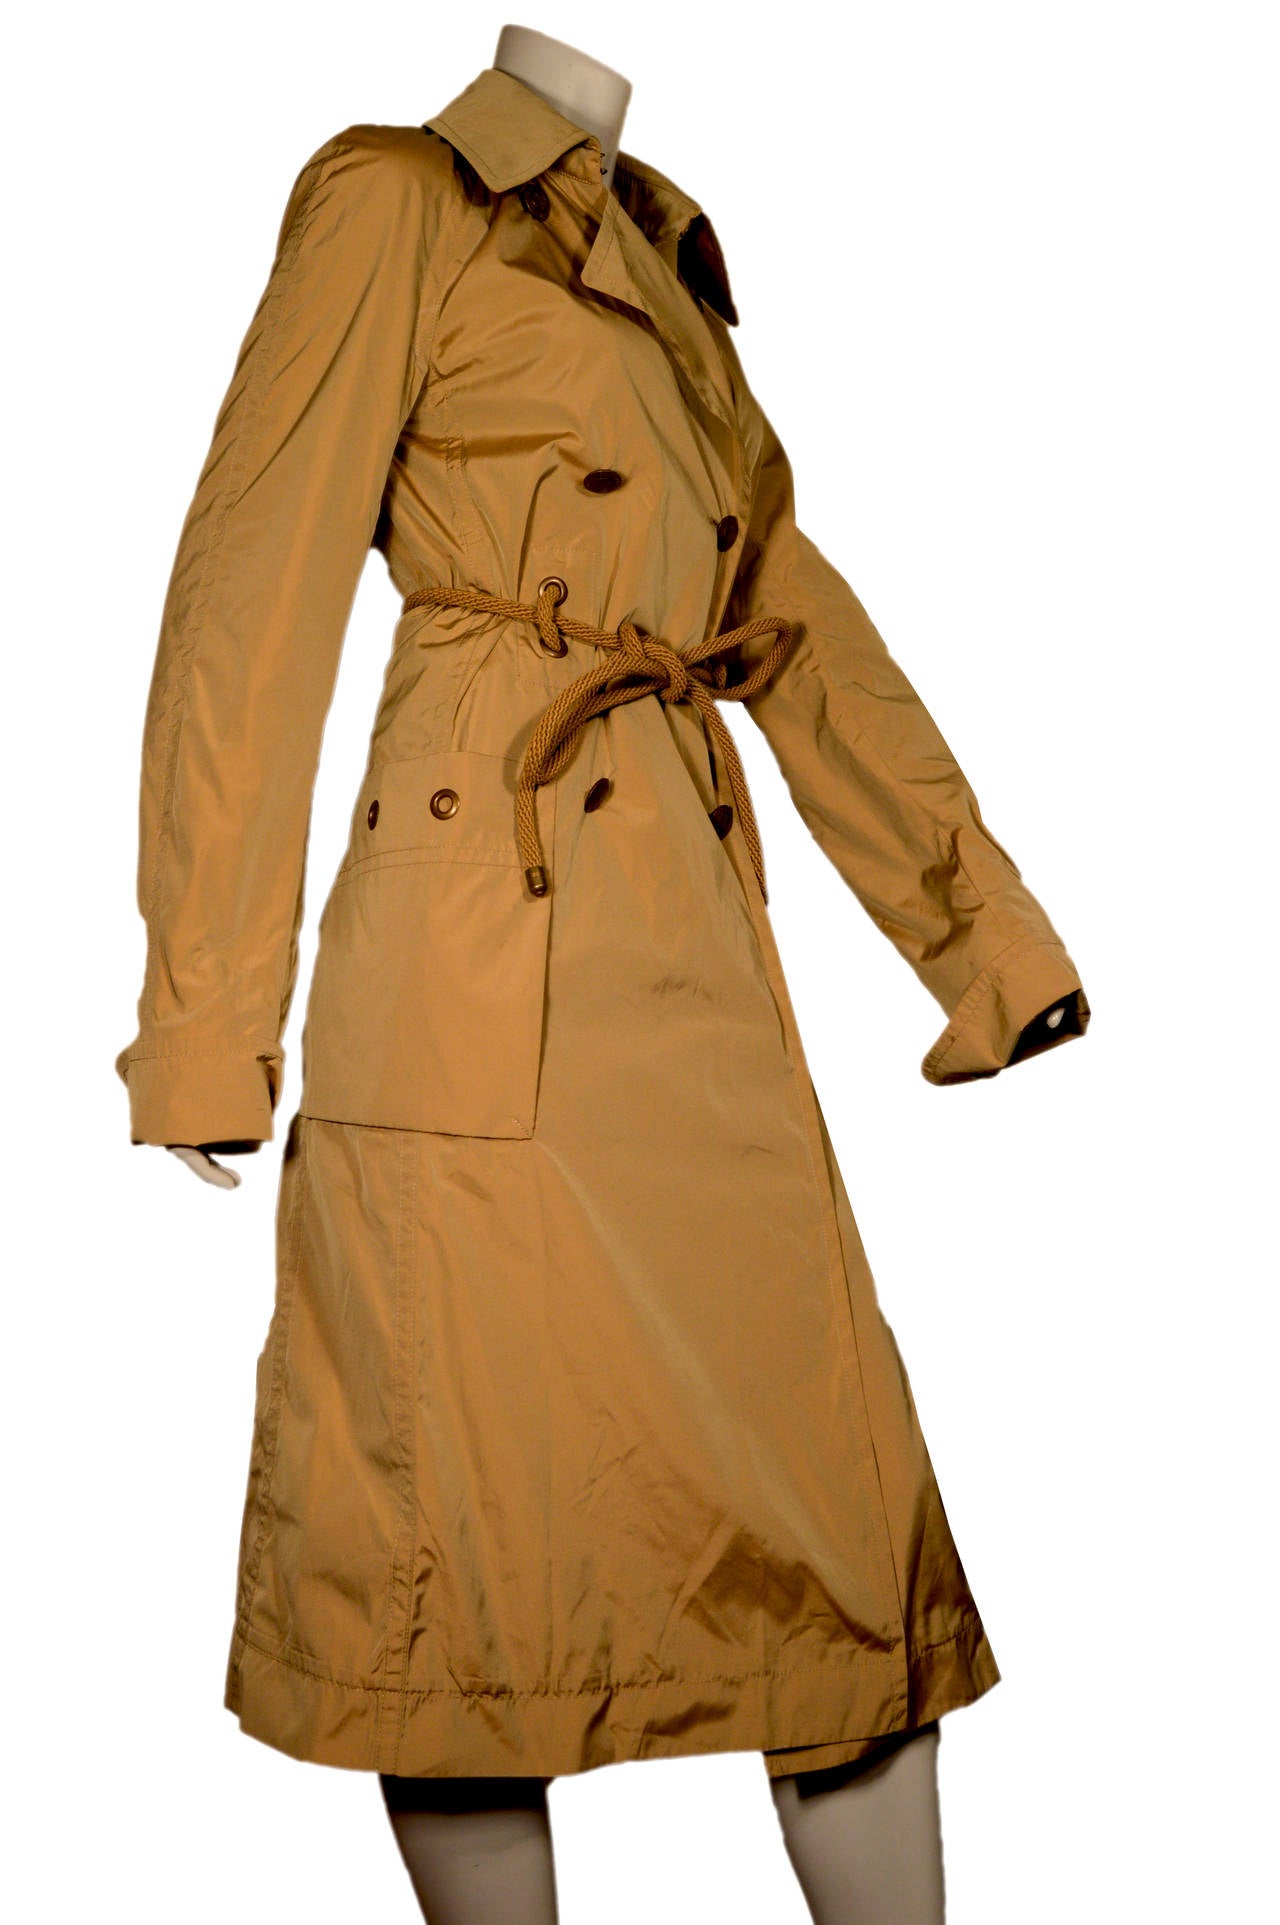 This double-breasted trench coat from YSL is an iridescent beige. There are metal buttons down the front, as well as metal grommets featured decoratively on the pockets, cuffs and belt. There are two oversized pockets on the front. The coat is